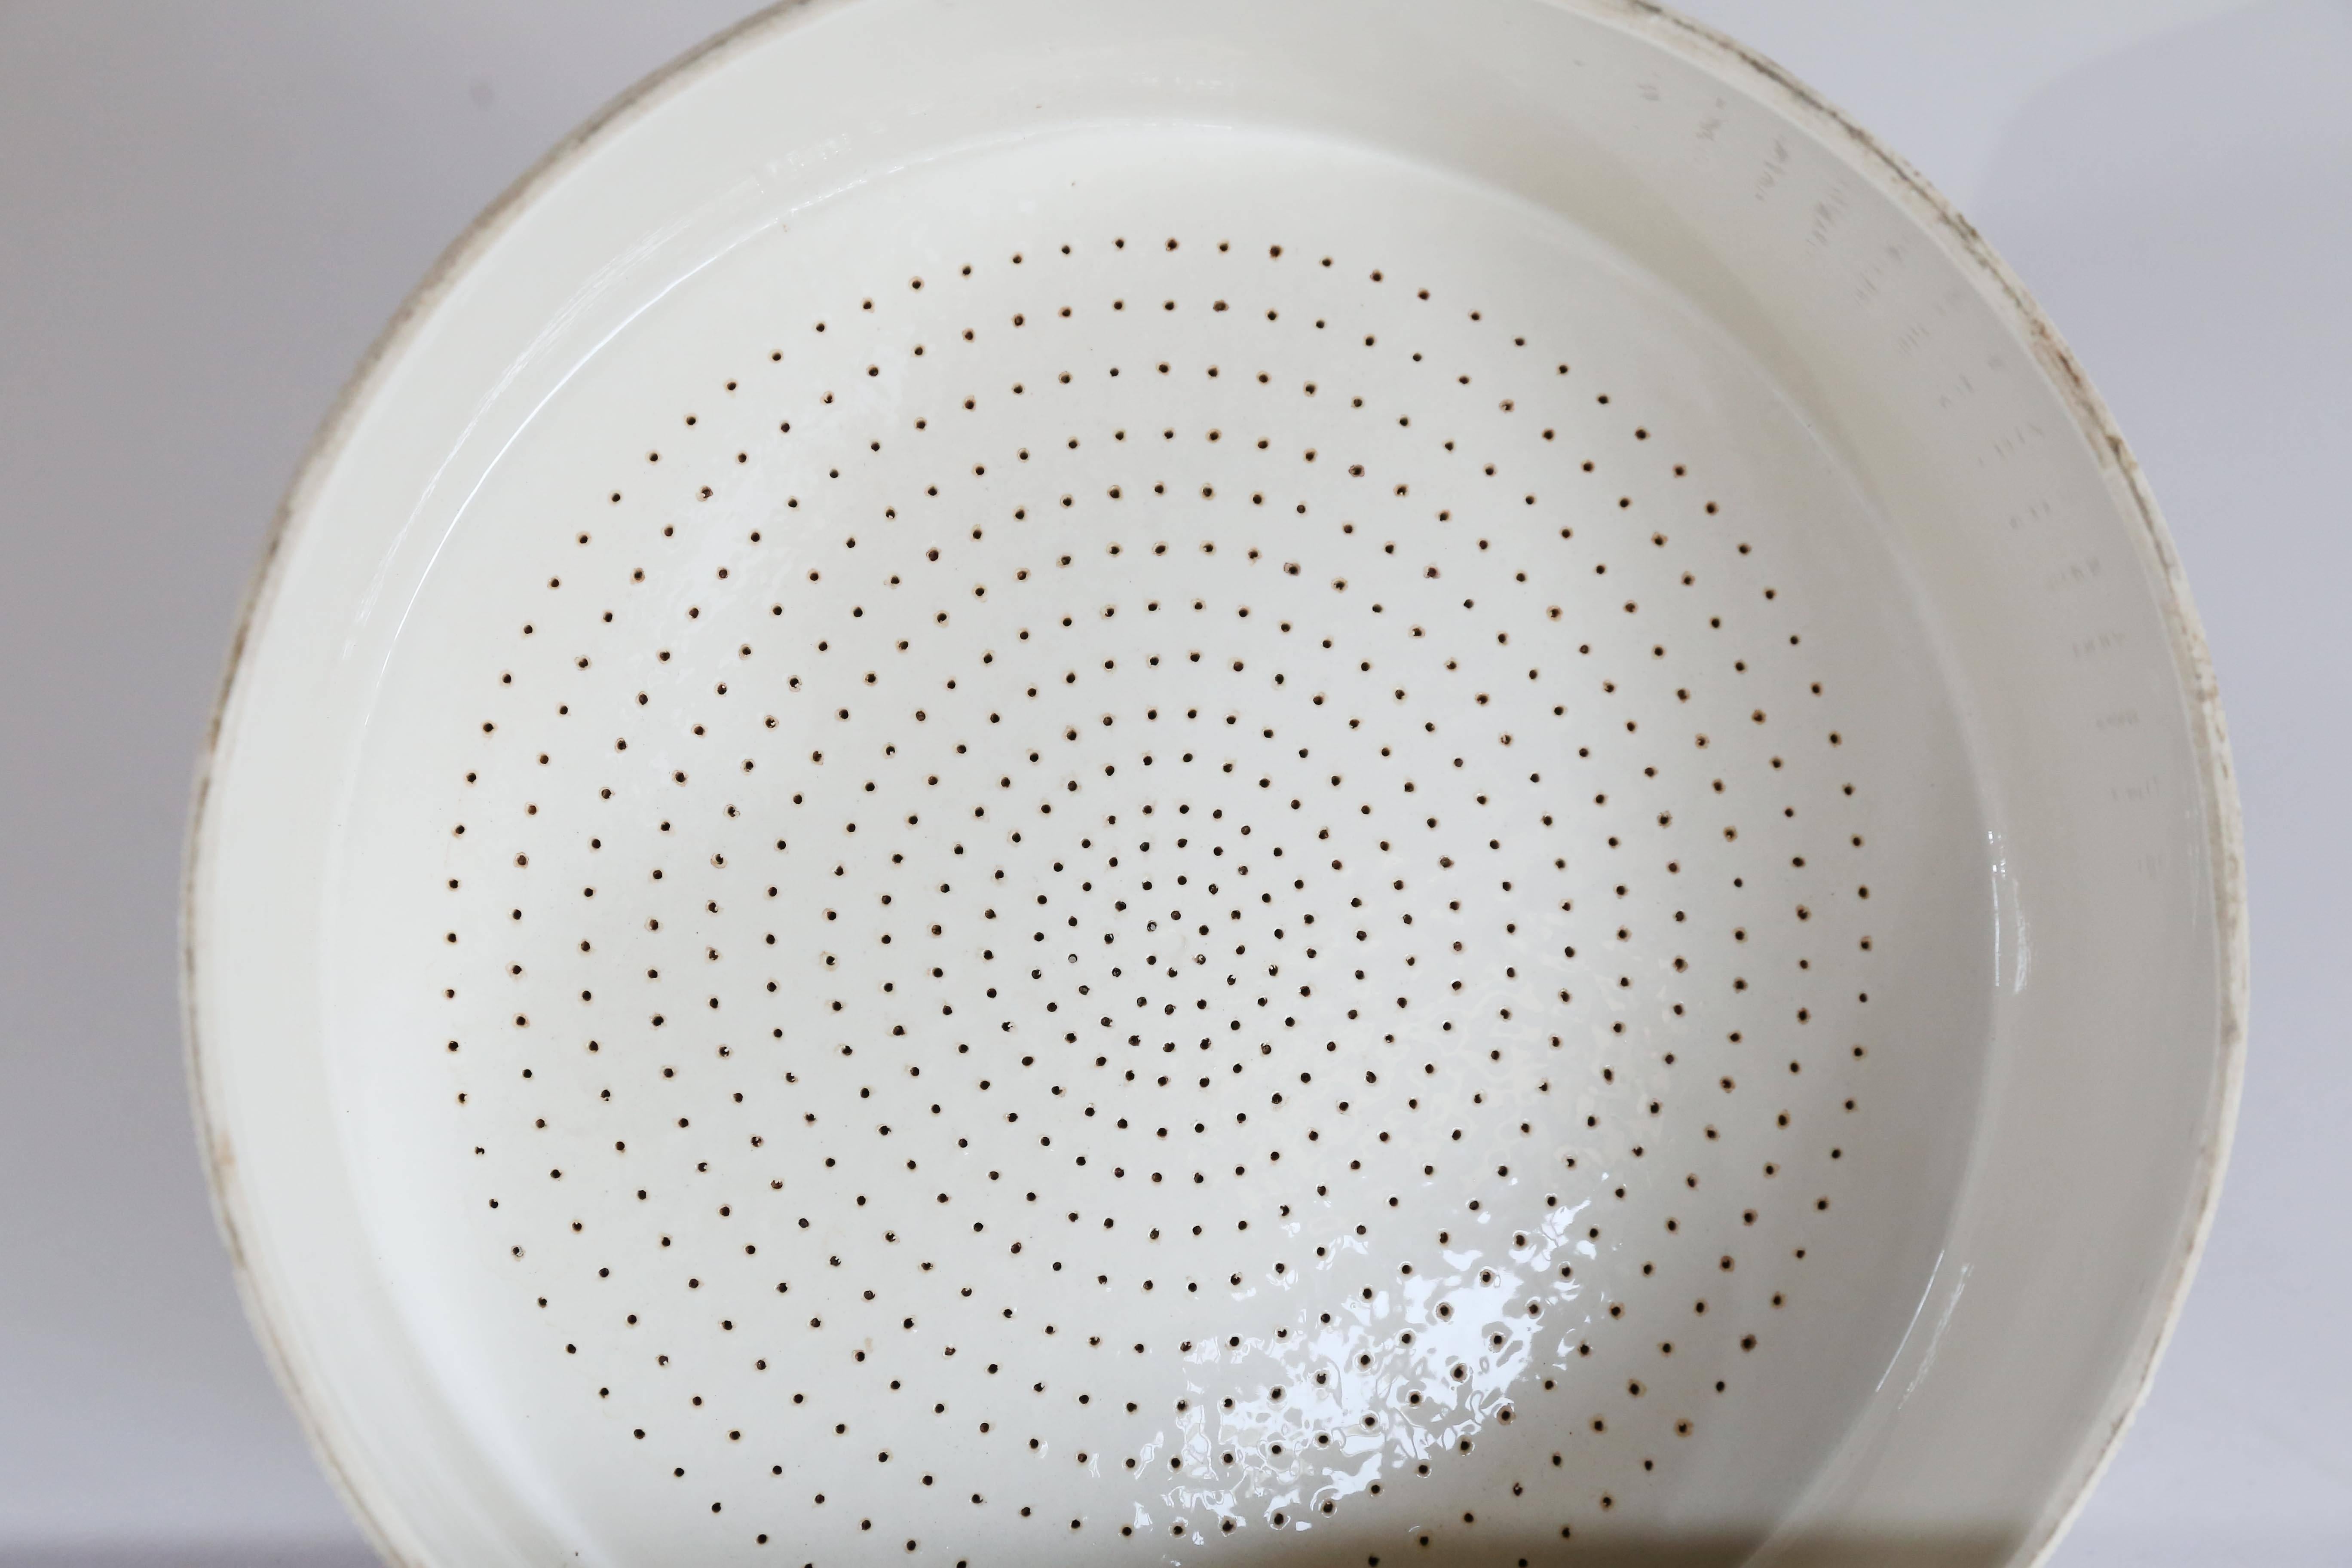 A large porcelain Büchner funnel from France. Although a Büchner funnel is a piece of laboratory equipment used in filtration, the visually interesting perforations and the strong sculptural quality of the piece makes for a dramatic and interesting